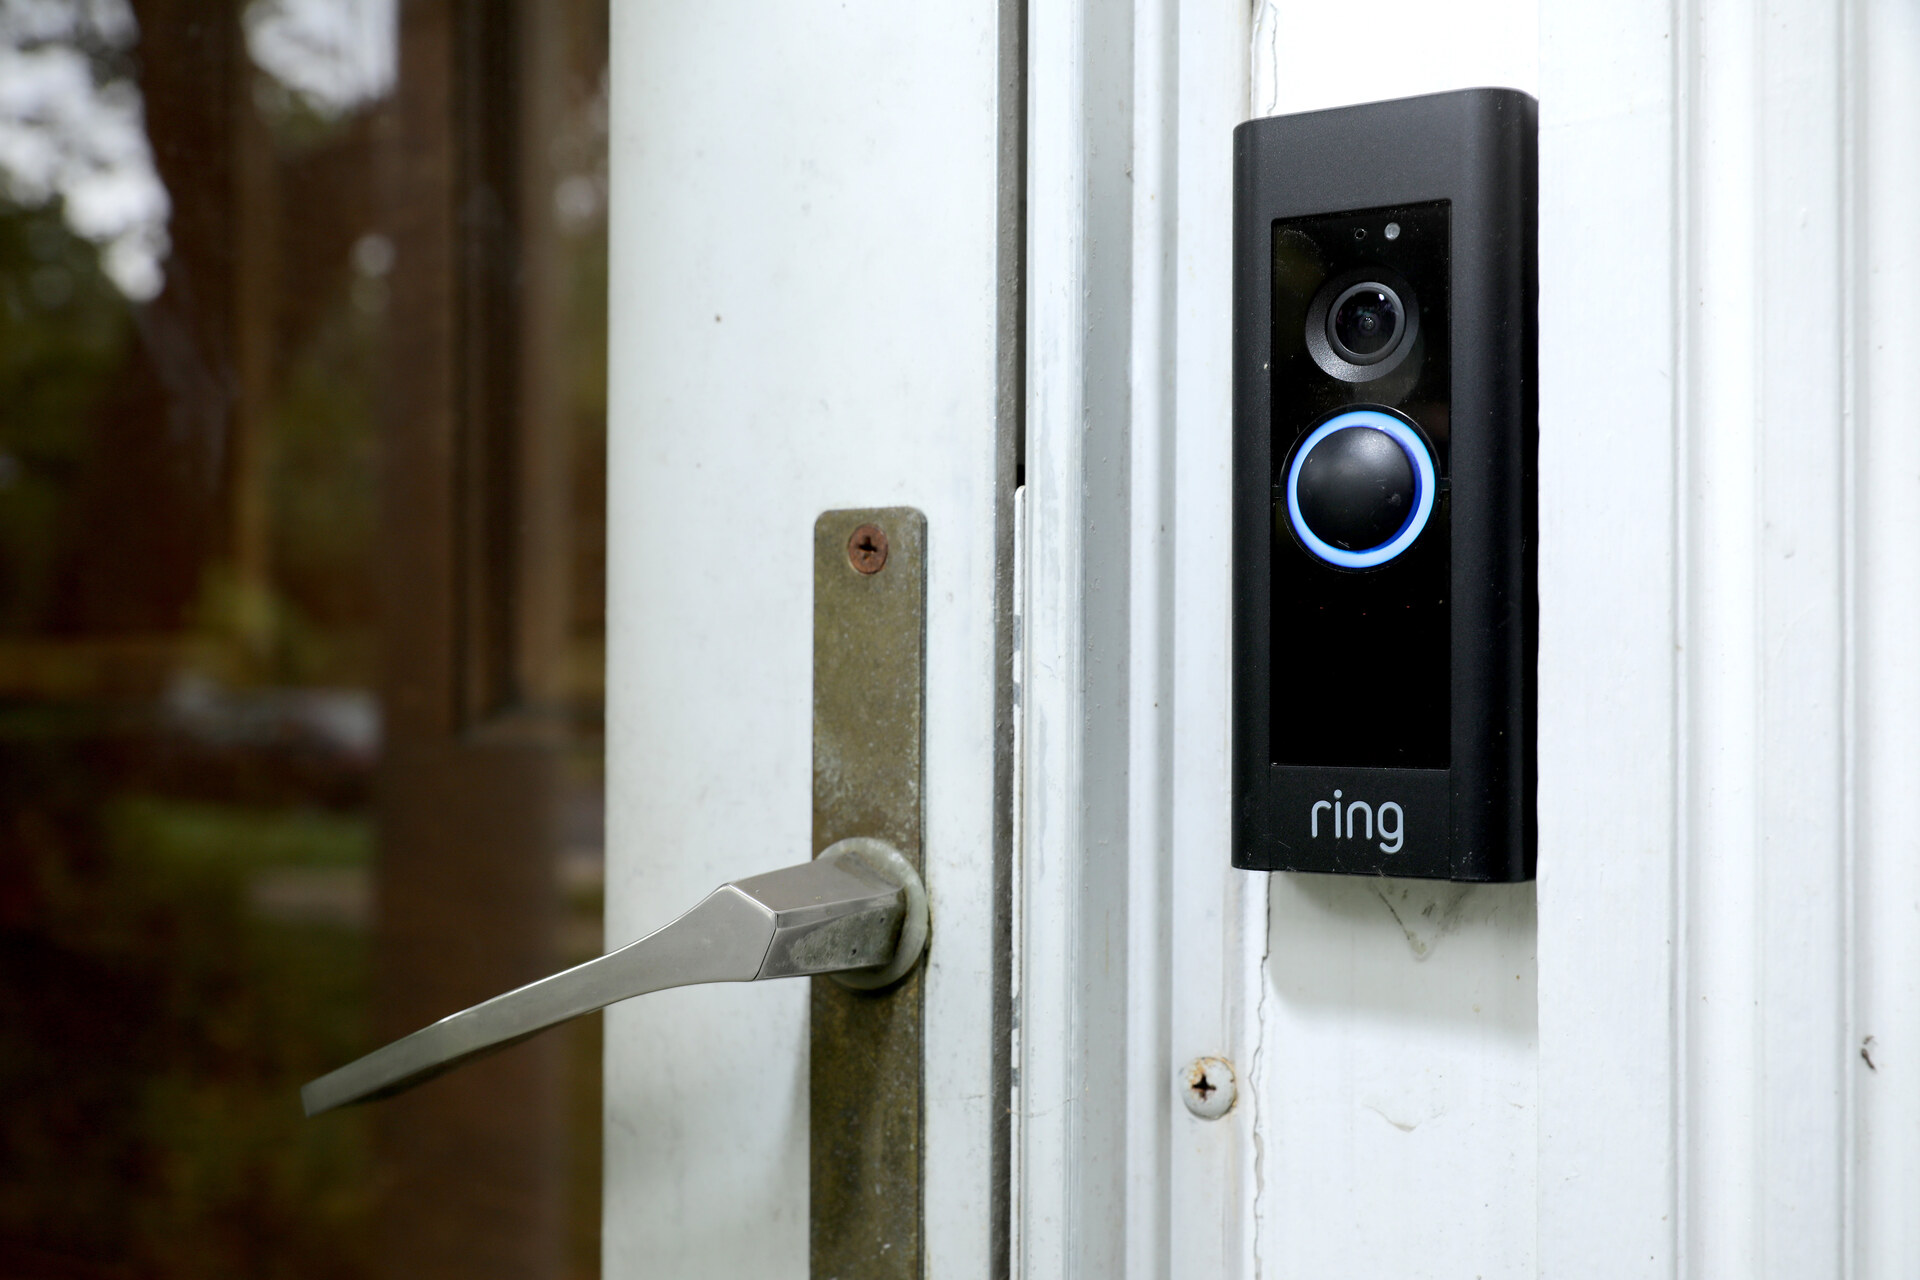 How To Share Ring Doorbell Access